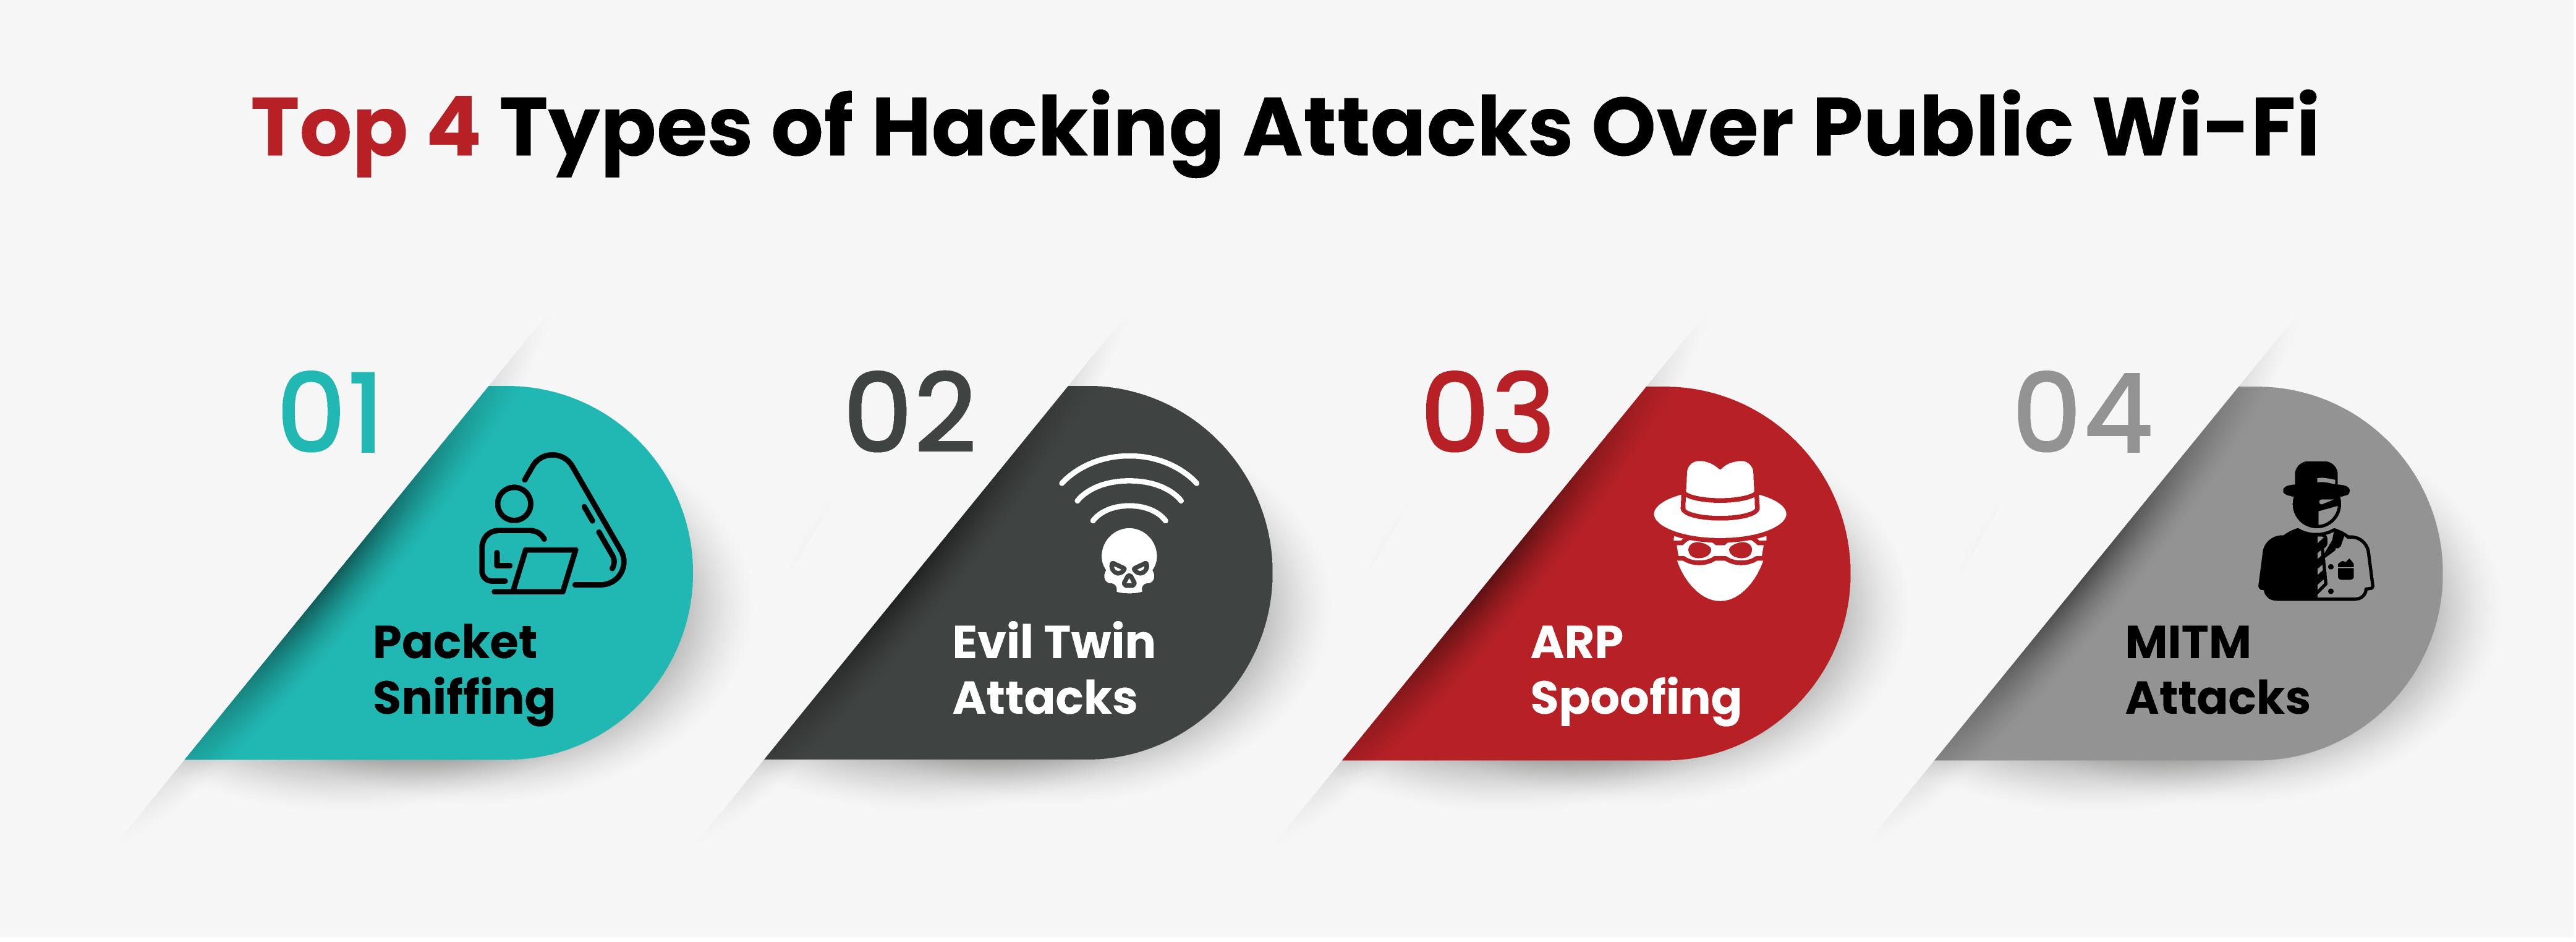 Top 4 Types of Hacking Attacks Over Public Wi-Fi